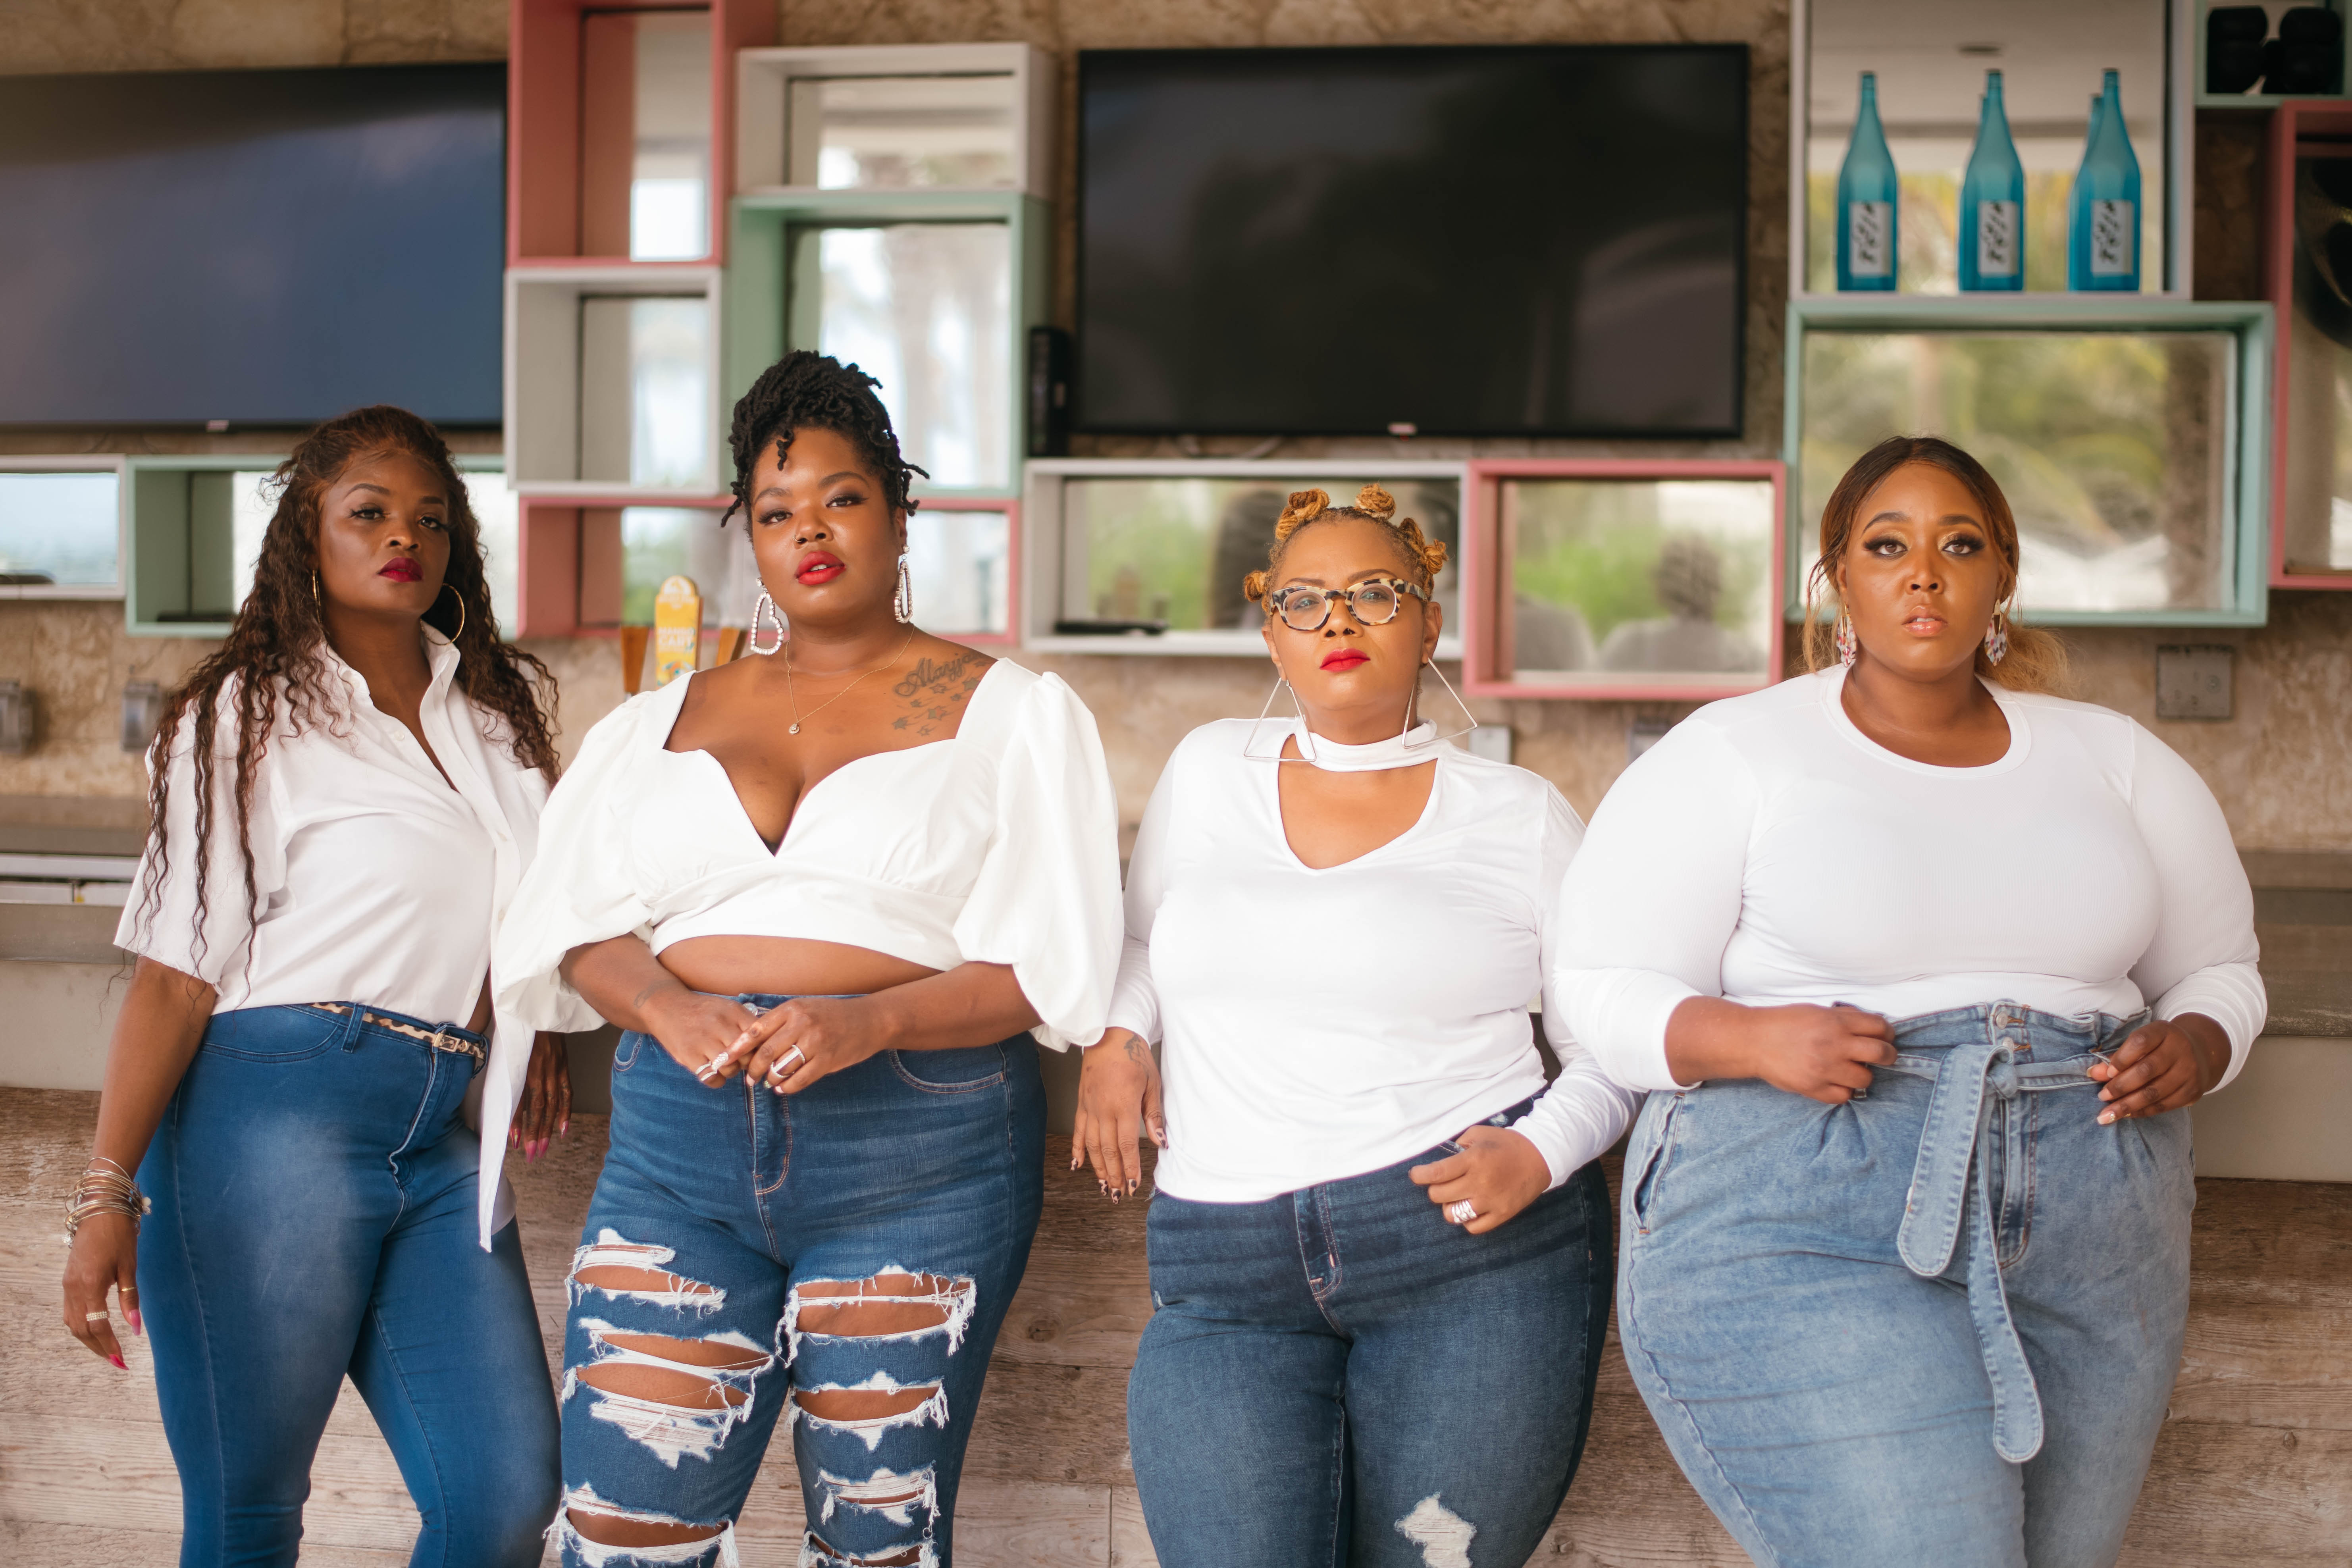 LUCKY BRAND PLUS SIZE COLLECTION NOW AVAILABLE IN STORES - Stylish Curves